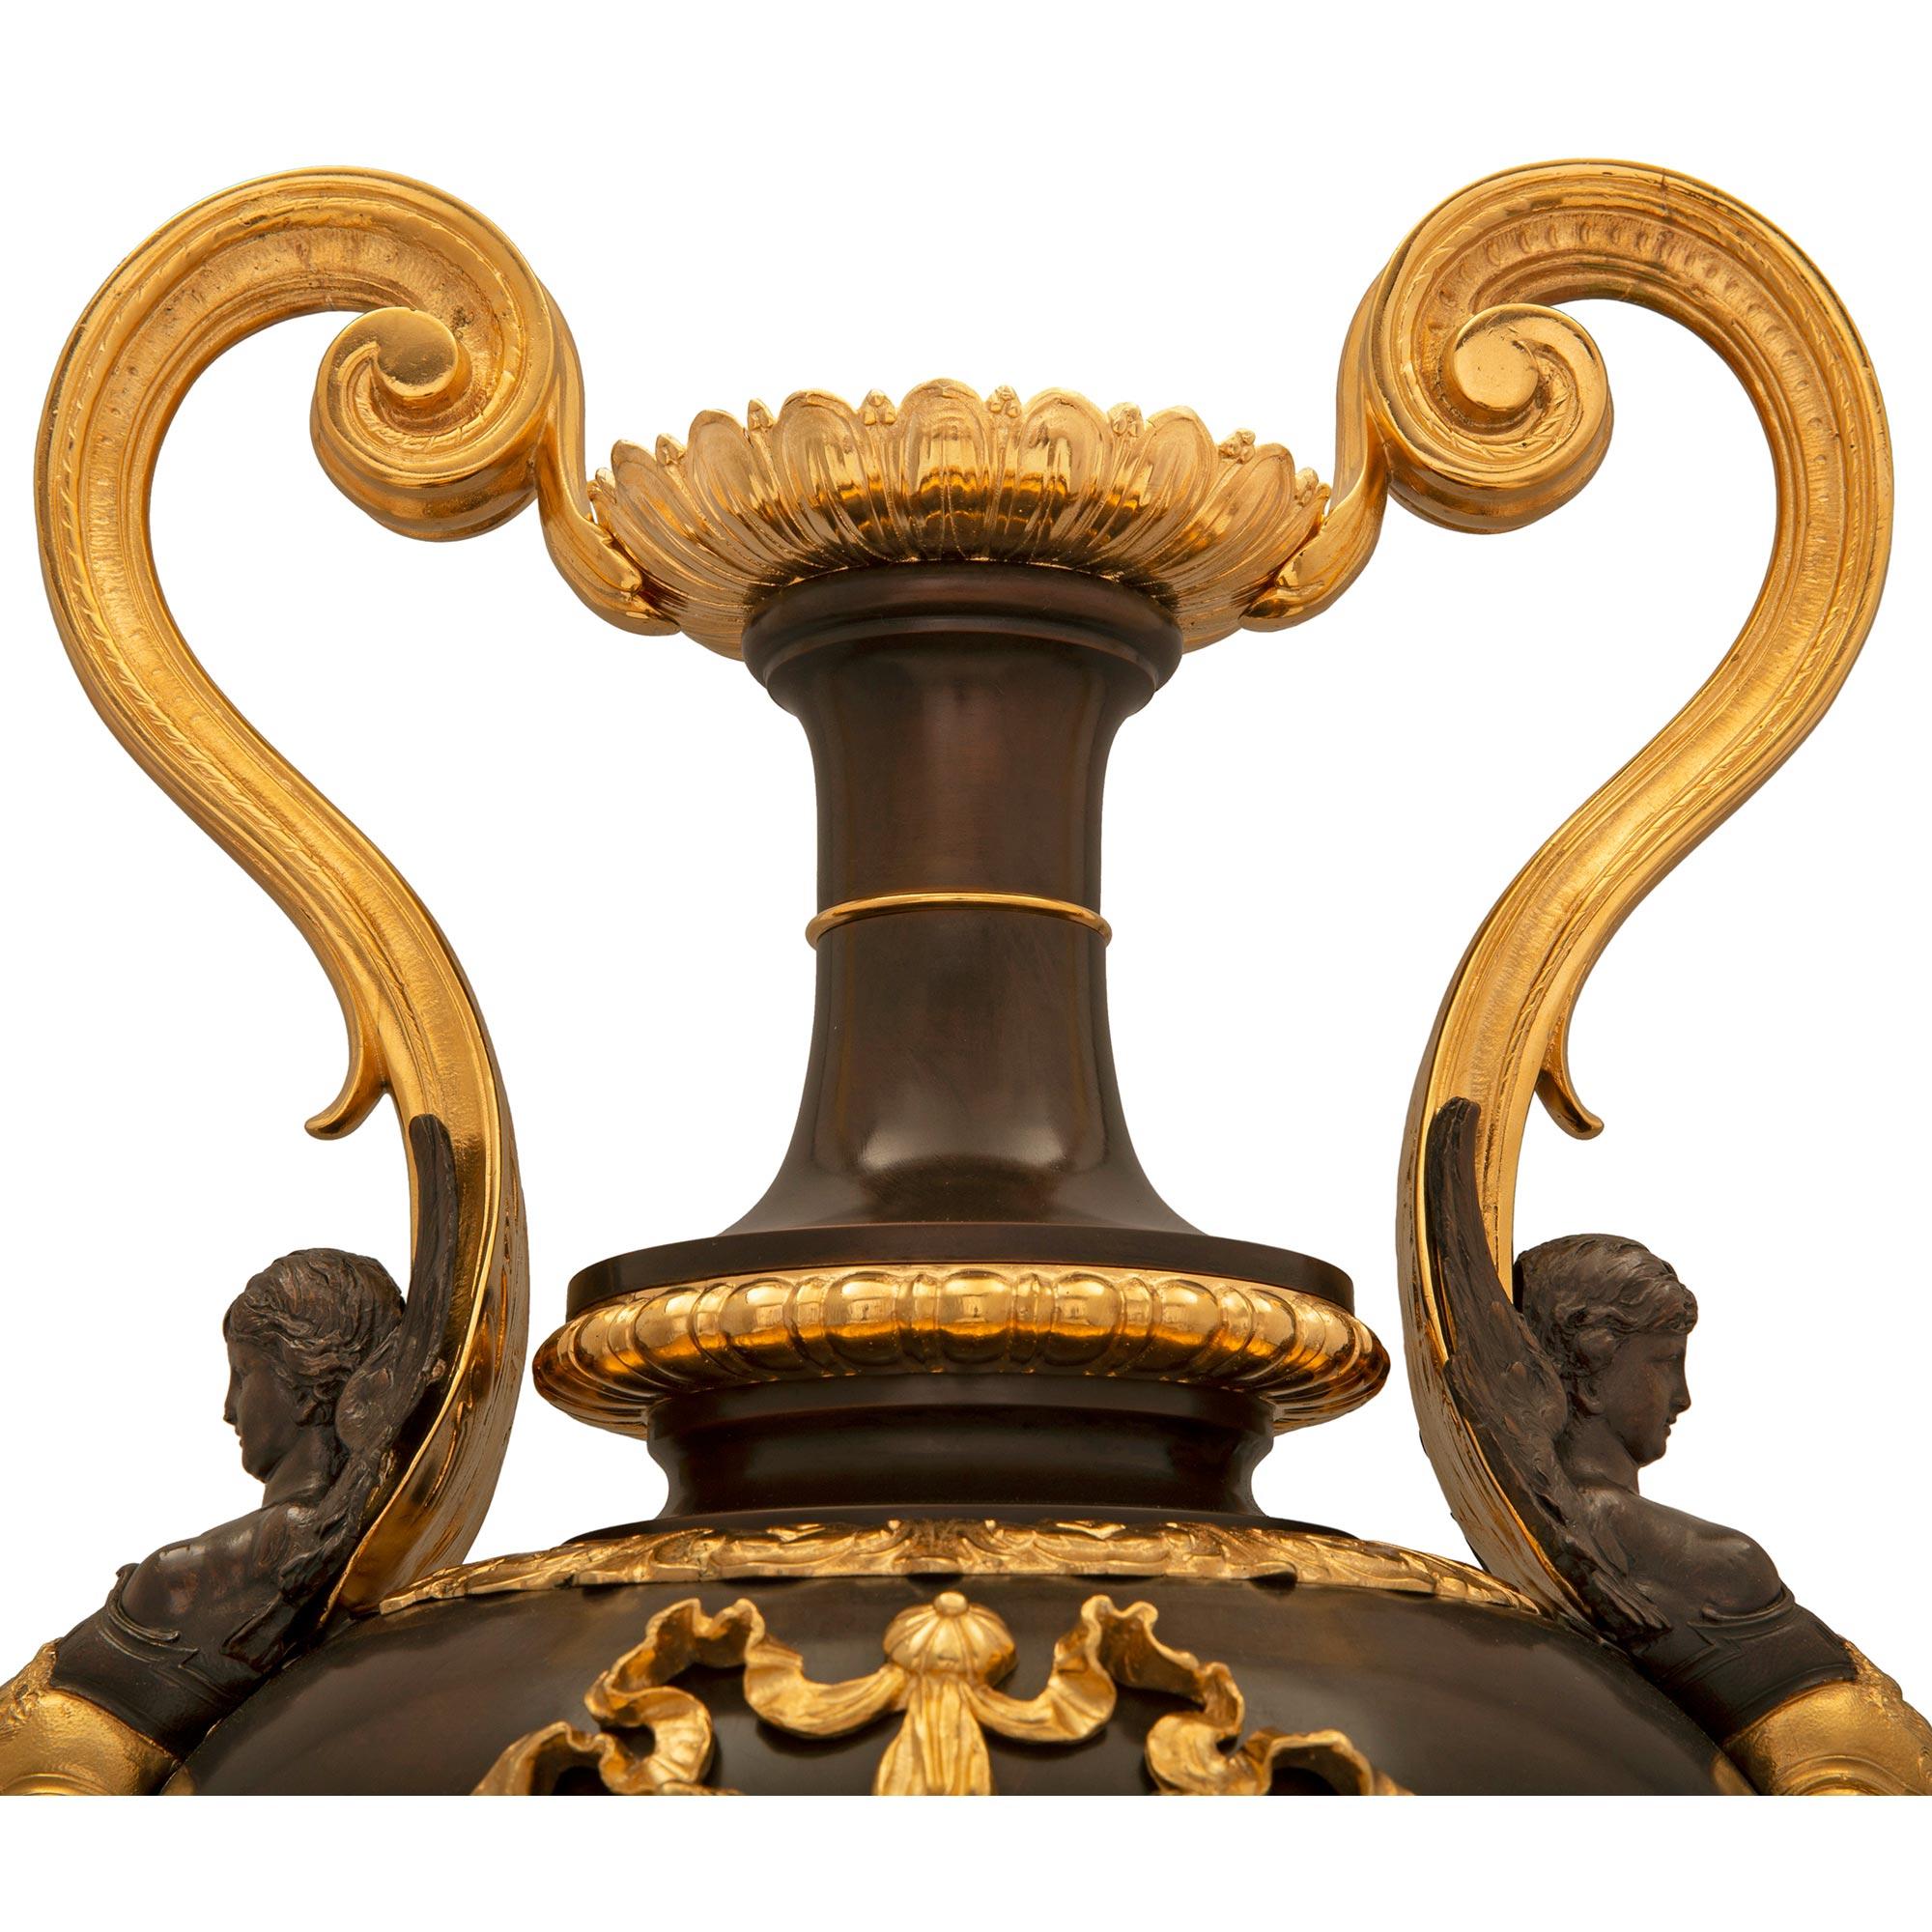 French, 19th Century, Belle Époque Period Bronze and Ormolu Urn For Sale 1